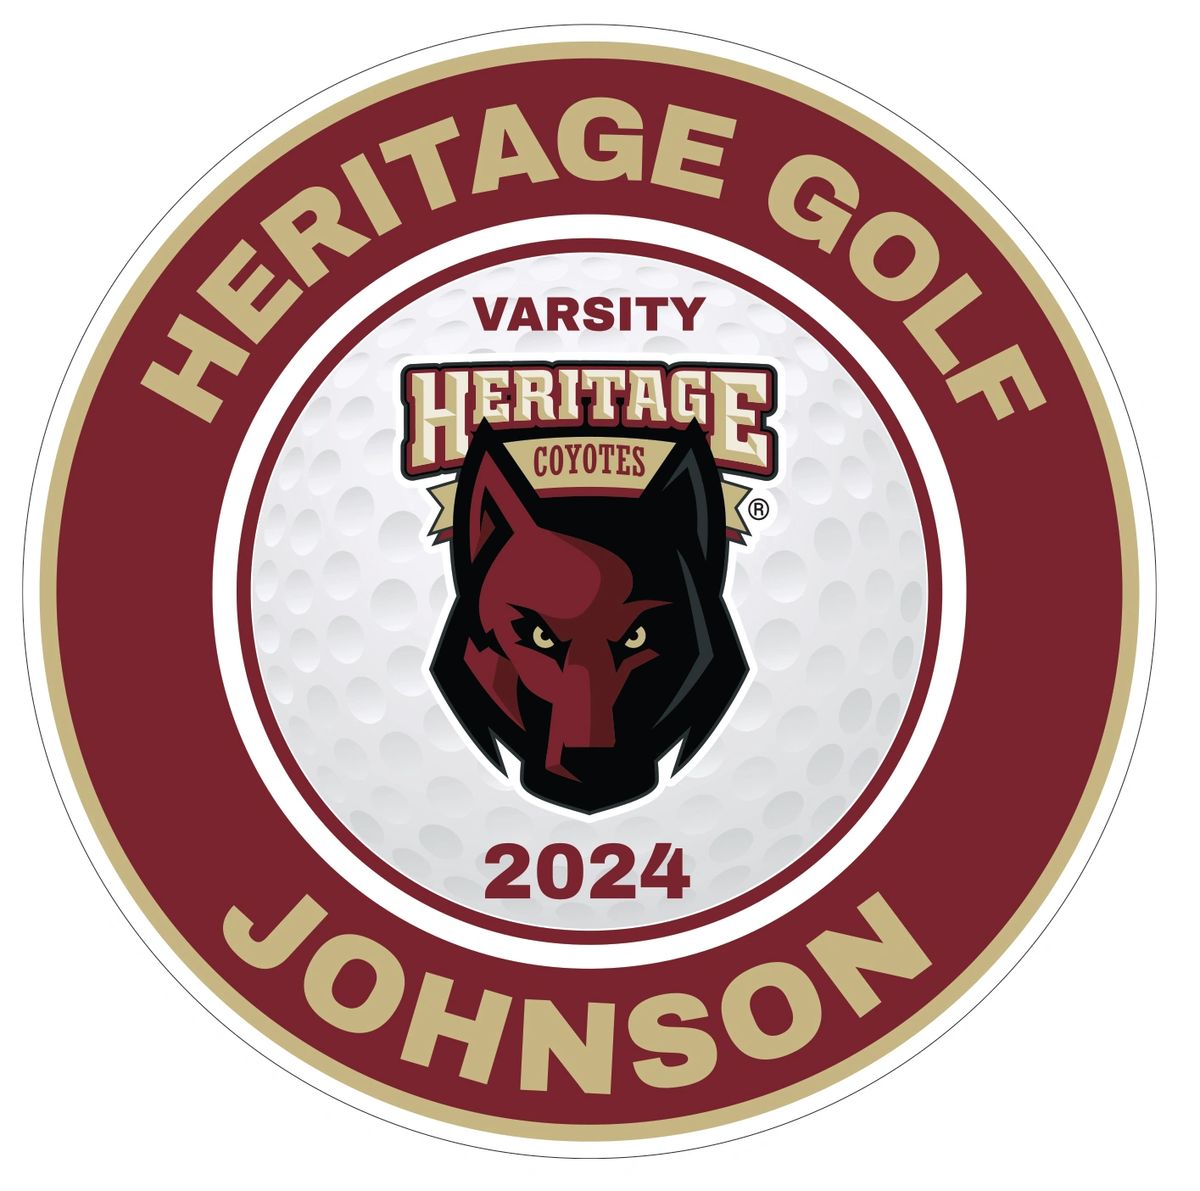 Heritage golf car decal OR personalized